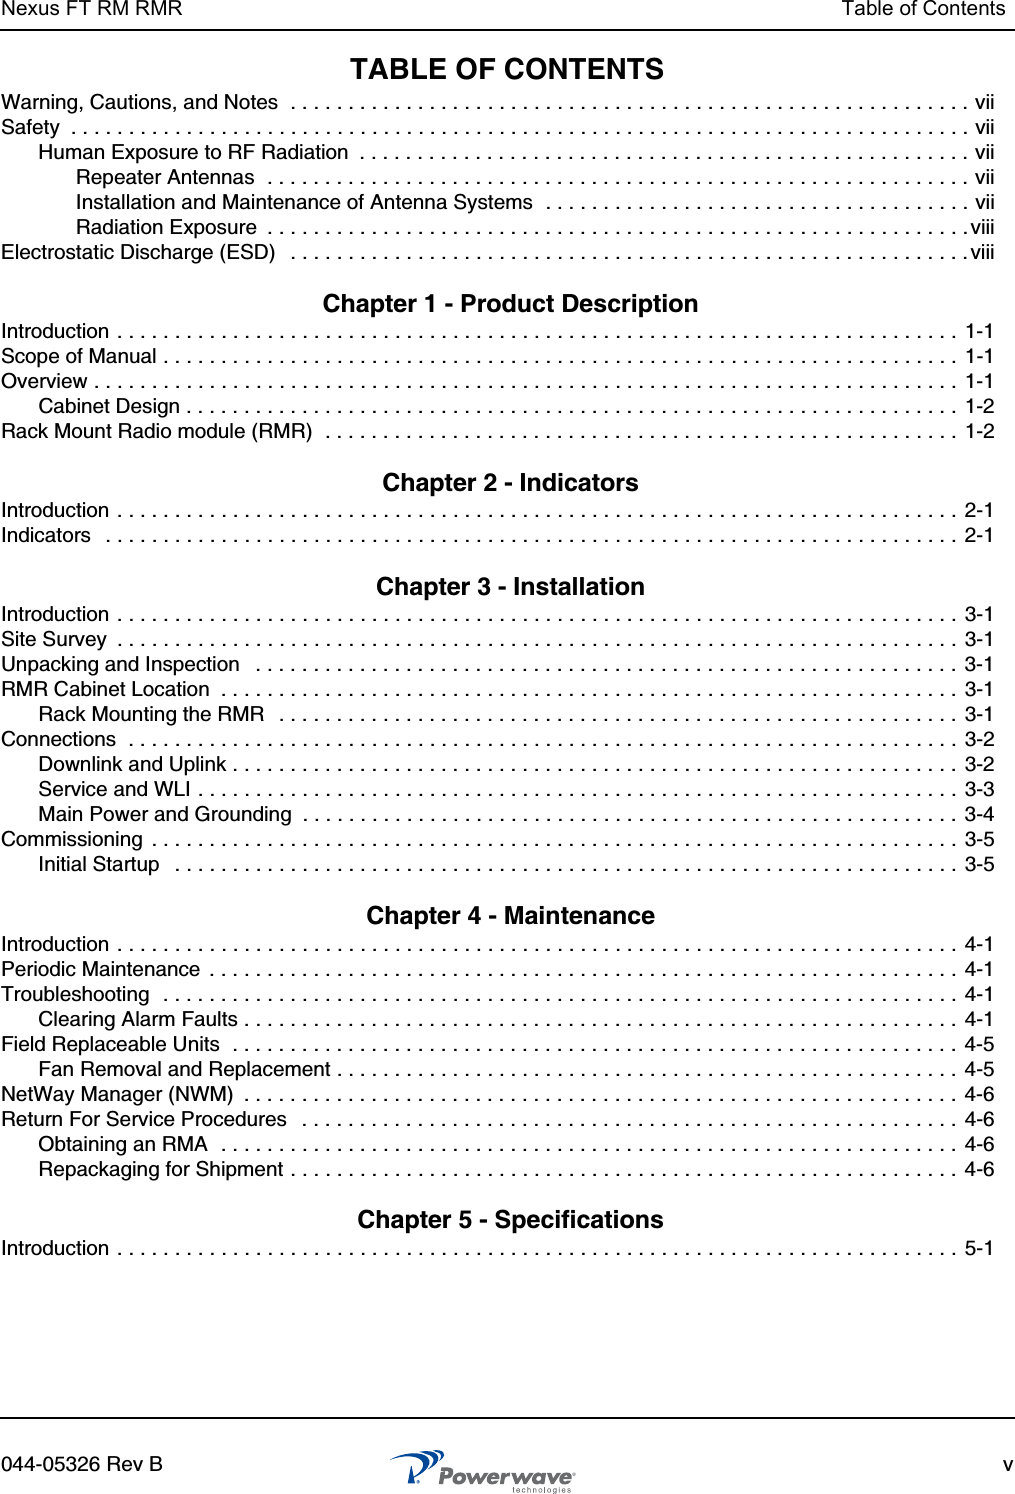 Nexus FT RM RMR Table of Contents044-05326 Rev B vTABLE OF CONTENTSWarning, Cautions, and Notes  . . . . . . . . . . . . . . . . . . . . . . . . . . . . . . . . . . . . . . . . . . . . . . . . . . . . . . . . . . . viiSafety  . . . . . . . . . . . . . . . . . . . . . . . . . . . . . . . . . . . . . . . . . . . . . . . . . . . . . . . . . . . . . . . . . . . . . . . . . . . . . . viiHuman Exposure to RF Radiation  . . . . . . . . . . . . . . . . . . . . . . . . . . . . . . . . . . . . . . . . . . . . . . . . . . . . . viiRepeater Antennas  . . . . . . . . . . . . . . . . . . . . . . . . . . . . . . . . . . . . . . . . . . . . . . . . . . . . . . . . . . . . . viiInstallation and Maintenance of Antenna Systems  . . . . . . . . . . . . . . . . . . . . . . . . . . . . . . . . . . . . . viiRadiation Exposure  . . . . . . . . . . . . . . . . . . . . . . . . . . . . . . . . . . . . . . . . . . . . . . . . . . . . . . . . . . . . .viiiElectrostatic Discharge (ESD)   . . . . . . . . . . . . . . . . . . . . . . . . . . . . . . . . . . . . . . . . . . . . . . . . . . . . . . . . . . . viii Chapter 1 - Product Description Introduction . . . . . . . . . . . . . . . . . . . . . . . . . . . . . . . . . . . . . . . . . . . . . . . . . . . . . . . . . . . . . . . . . . . . . . . . . 1-1Scope of Manual . . . . . . . . . . . . . . . . . . . . . . . . . . . . . . . . . . . . . . . . . . . . . . . . . . . . . . . . . . . . . . . . . . . . . 1-1Overview . . . . . . . . . . . . . . . . . . . . . . . . . . . . . . . . . . . . . . . . . . . . . . . . . . . . . . . . . . . . . . . . . . . . . . . . . . .  1-1Cabinet Design . . . . . . . . . . . . . . . . . . . . . . . . . . . . . . . . . . . . . . . . . . . . . . . . . . . . . . . . . . . . . . . . . . .  1-2Rack Mount Radio module (RMR)  . . . . . . . . . . . . . . . . . . . . . . . . . . . . . . . . . . . . . . . . . . . . . . . . . . . . . . .  1-2 Chapter 2 - Indicators Introduction . . . . . . . . . . . . . . . . . . . . . . . . . . . . . . . . . . . . . . . . . . . . . . . . . . . . . . . . . . . . . . . . . . . . . . . . . 2-1Indicators   . . . . . . . . . . . . . . . . . . . . . . . . . . . . . . . . . . . . . . . . . . . . . . . . . . . . . . . . . . . . . . . . . . . . . . . . . . 2-1 Chapter 3 - Installation Introduction . . . . . . . . . . . . . . . . . . . . . . . . . . . . . . . . . . . . . . . . . . . . . . . . . . . . . . . . . . . . . . . . . . . . . . . . . 3-1Site Survey  . . . . . . . . . . . . . . . . . . . . . . . . . . . . . . . . . . . . . . . . . . . . . . . . . . . . . . . . . . . . . . . . . . . . . . . . . 3-1Unpacking and Inspection   . . . . . . . . . . . . . . . . . . . . . . . . . . . . . . . . . . . . . . . . . . . . . . . . . . . . . . . . . . . . . 3-1RMR Cabinet Location  . . . . . . . . . . . . . . . . . . . . . . . . . . . . . . . . . . . . . . . . . . . . . . . . . . . . . . . . . . . . . . . .  3-1Rack Mounting the RMR   . . . . . . . . . . . . . . . . . . . . . . . . . . . . . . . . . . . . . . . . . . . . . . . . . . . . . . . . . . . 3-1Connections  . . . . . . . . . . . . . . . . . . . . . . . . . . . . . . . . . . . . . . . . . . . . . . . . . . . . . . . . . . . . . . . . . . . . . . . . 3-2Downlink and Uplink . . . . . . . . . . . . . . . . . . . . . . . . . . . . . . . . . . . . . . . . . . . . . . . . . . . . . . . . . . . . . . . 3-2Service and WLI . . . . . . . . . . . . . . . . . . . . . . . . . . . . . . . . . . . . . . . . . . . . . . . . . . . . . . . . . . . . . . . . . .  3-3Main Power and Grounding  . . . . . . . . . . . . . . . . . . . . . . . . . . . . . . . . . . . . . . . . . . . . . . . . . . . . . . . . .  3-4Commissioning  . . . . . . . . . . . . . . . . . . . . . . . . . . . . . . . . . . . . . . . . . . . . . . . . . . . . . . . . . . . . . . . . . . . . . .  3-5Initial Startup   . . . . . . . . . . . . . . . . . . . . . . . . . . . . . . . . . . . . . . . . . . . . . . . . . . . . . . . . . . . . . . . . . . . . 3-5 Chapter 4 - Maintenance Introduction . . . . . . . . . . . . . . . . . . . . . . . . . . . . . . . . . . . . . . . . . . . . . . . . . . . . . . . . . . . . . . . . . . . . . . . . . 4-1Periodic Maintenance  . . . . . . . . . . . . . . . . . . . . . . . . . . . . . . . . . . . . . . . . . . . . . . . . . . . . . . . . . . . . . . . . .  4-1Troubleshooting  . . . . . . . . . . . . . . . . . . . . . . . . . . . . . . . . . . . . . . . . . . . . . . . . . . . . . . . . . . . . . . . . . . . . .  4-1Clearing Alarm Faults . . . . . . . . . . . . . . . . . . . . . . . . . . . . . . . . . . . . . . . . . . . . . . . . . . . . . . . . . . . . . . 4-1Field Replaceable Units  . . . . . . . . . . . . . . . . . . . . . . . . . . . . . . . . . . . . . . . . . . . . . . . . . . . . . . . . . . . . . . . 4-5Fan Removal and Replacement . . . . . . . . . . . . . . . . . . . . . . . . . . . . . . . . . . . . . . . . . . . . . . . . . . . . . .  4-5NetWay Manager (NWM)  . . . . . . . . . . . . . . . . . . . . . . . . . . . . . . . . . . . . . . . . . . . . . . . . . . . . . . . . . . . . . . 4-6Return For Service Procedures   . . . . . . . . . . . . . . . . . . . . . . . . . . . . . . . . . . . . . . . . . . . . . . . . . . . . . . . . .  4-6Obtaining an RMA  . . . . . . . . . . . . . . . . . . . . . . . . . . . . . . . . . . . . . . . . . . . . . . . . . . . . . . . . . . . . . . . .  4-6Repackaging for Shipment . . . . . . . . . . . . . . . . . . . . . . . . . . . . . . . . . . . . . . . . . . . . . . . . . . . . . . . . . . 4-6 Chapter 5 - Specifications Introduction . . . . . . . . . . . . . . . . . . . . . . . . . . . . . . . . . . . . . . . . . . . . . . . . . . . . . . . . . . . . . . . . . . . . . . . . . 5-1